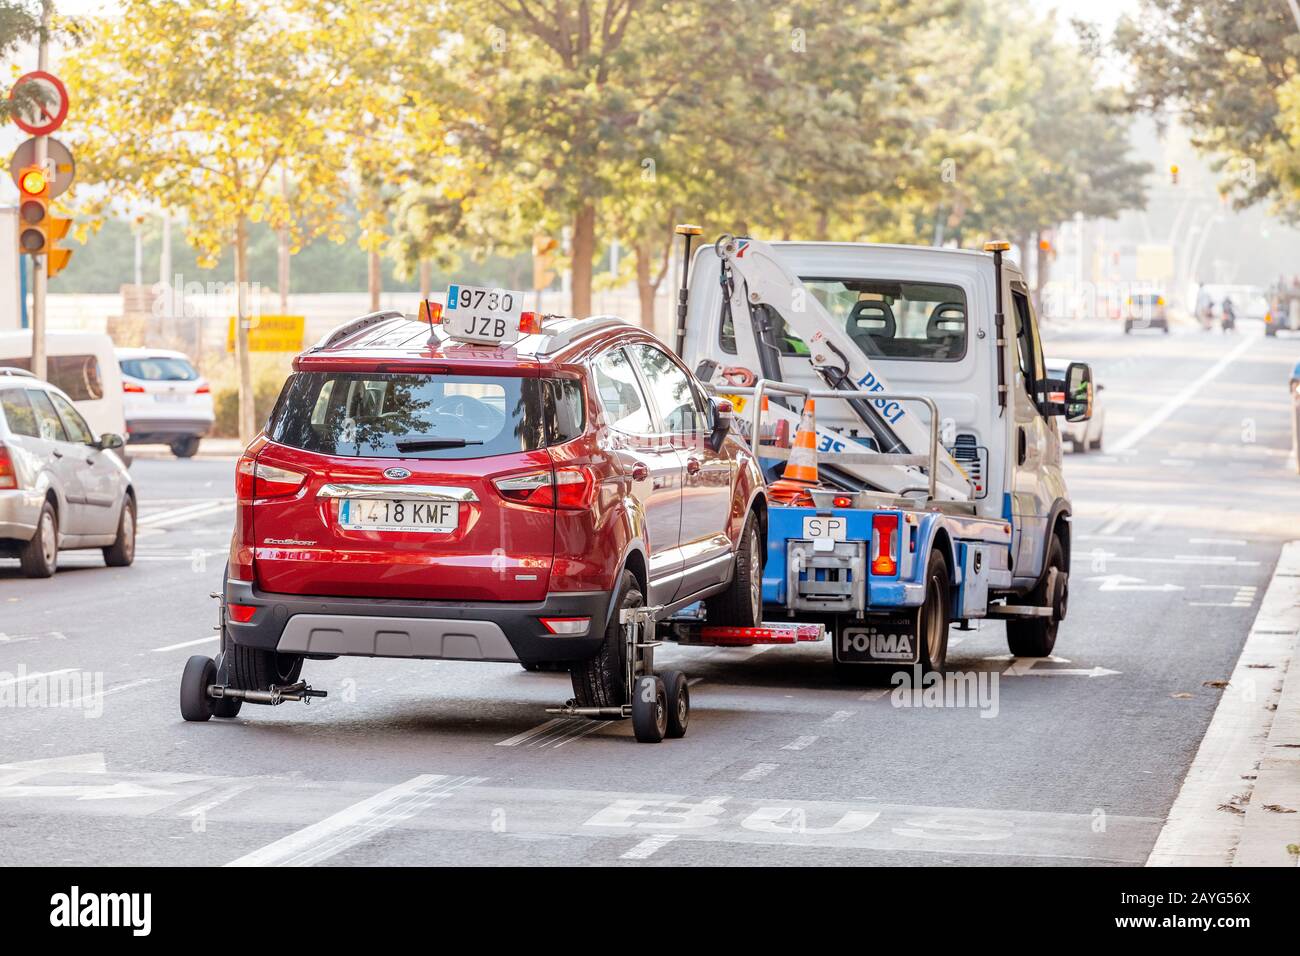 29 JULY 2018, BARCELONA, SPAIN: tow truck transporting car as punishment for wrong parking Stock Photo